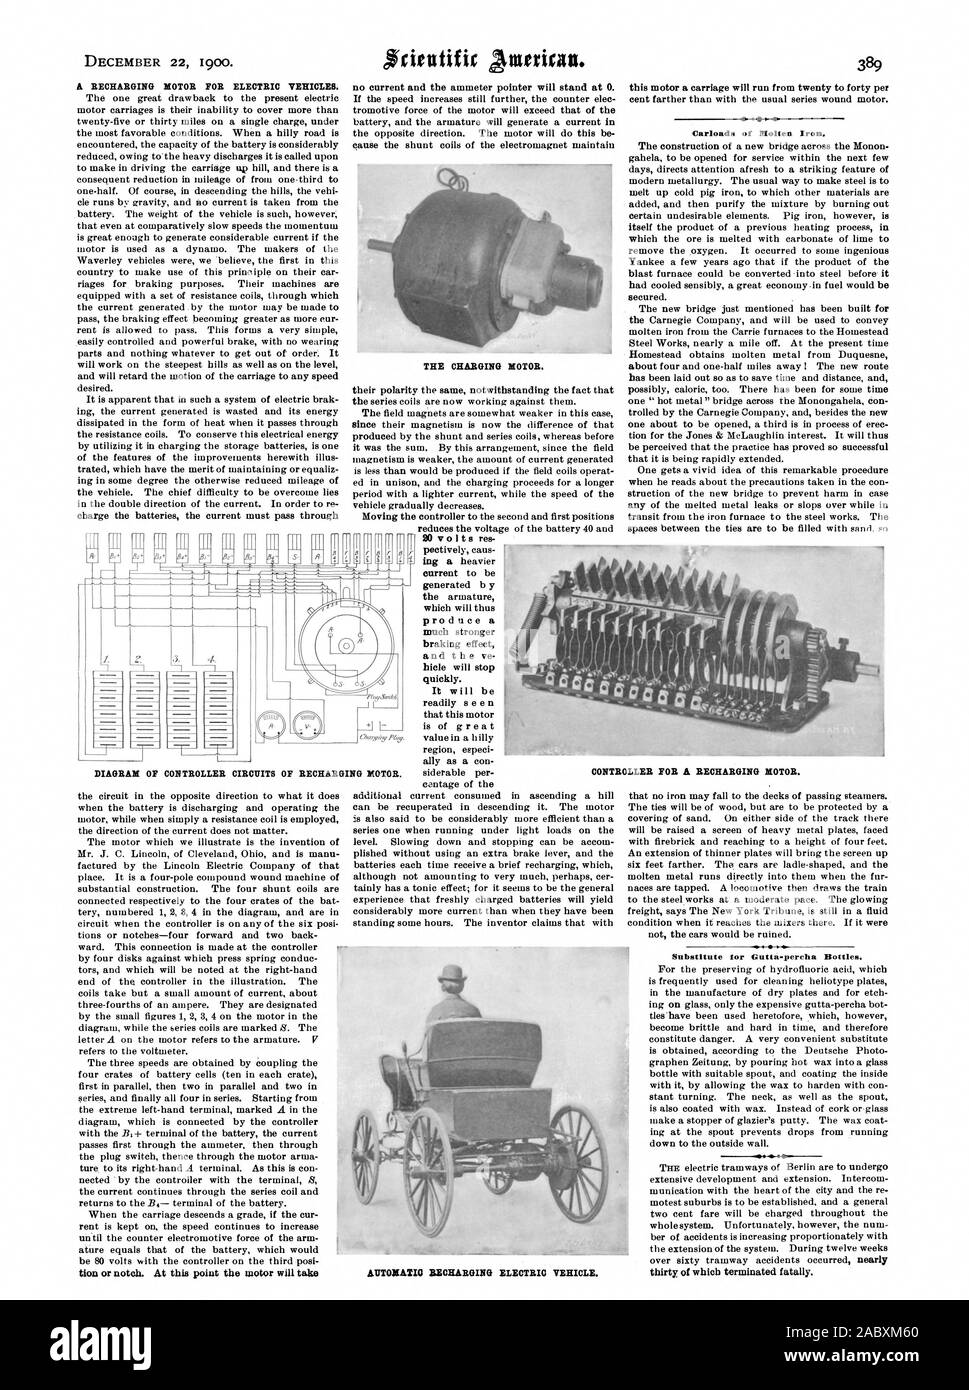 DIAGRAM OF CON TROLLER CIRCUITS OF THE CHARGING MOTOR. Carloads of Molten Iron. Substitute for Gutta-percha Bottles. thirty of which terminated fatally. RECHARGING MOTOR., scientific american, 1900-12-22 Stock Photo